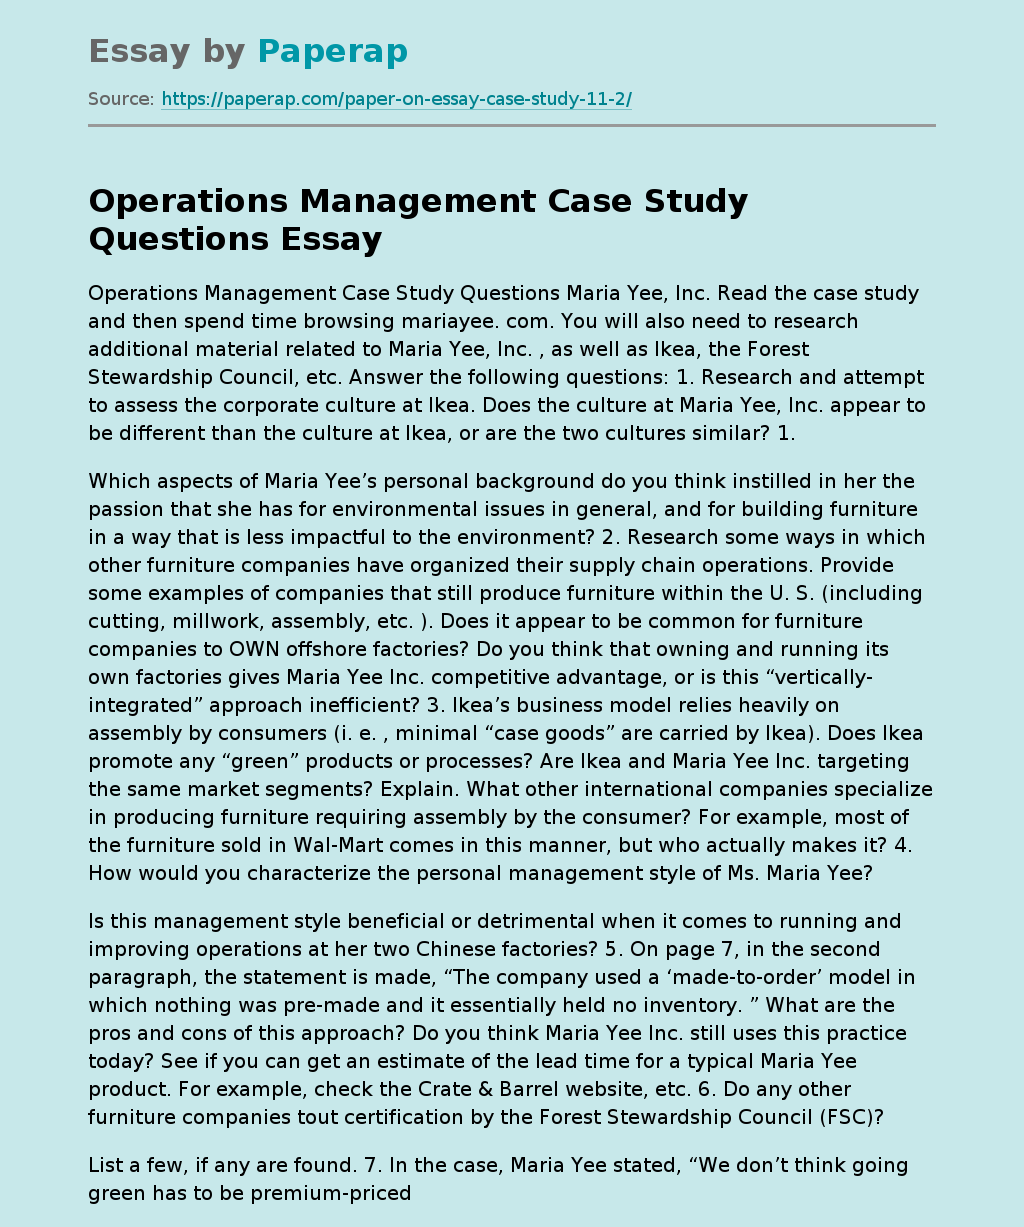 Operations Management Case Study Questions